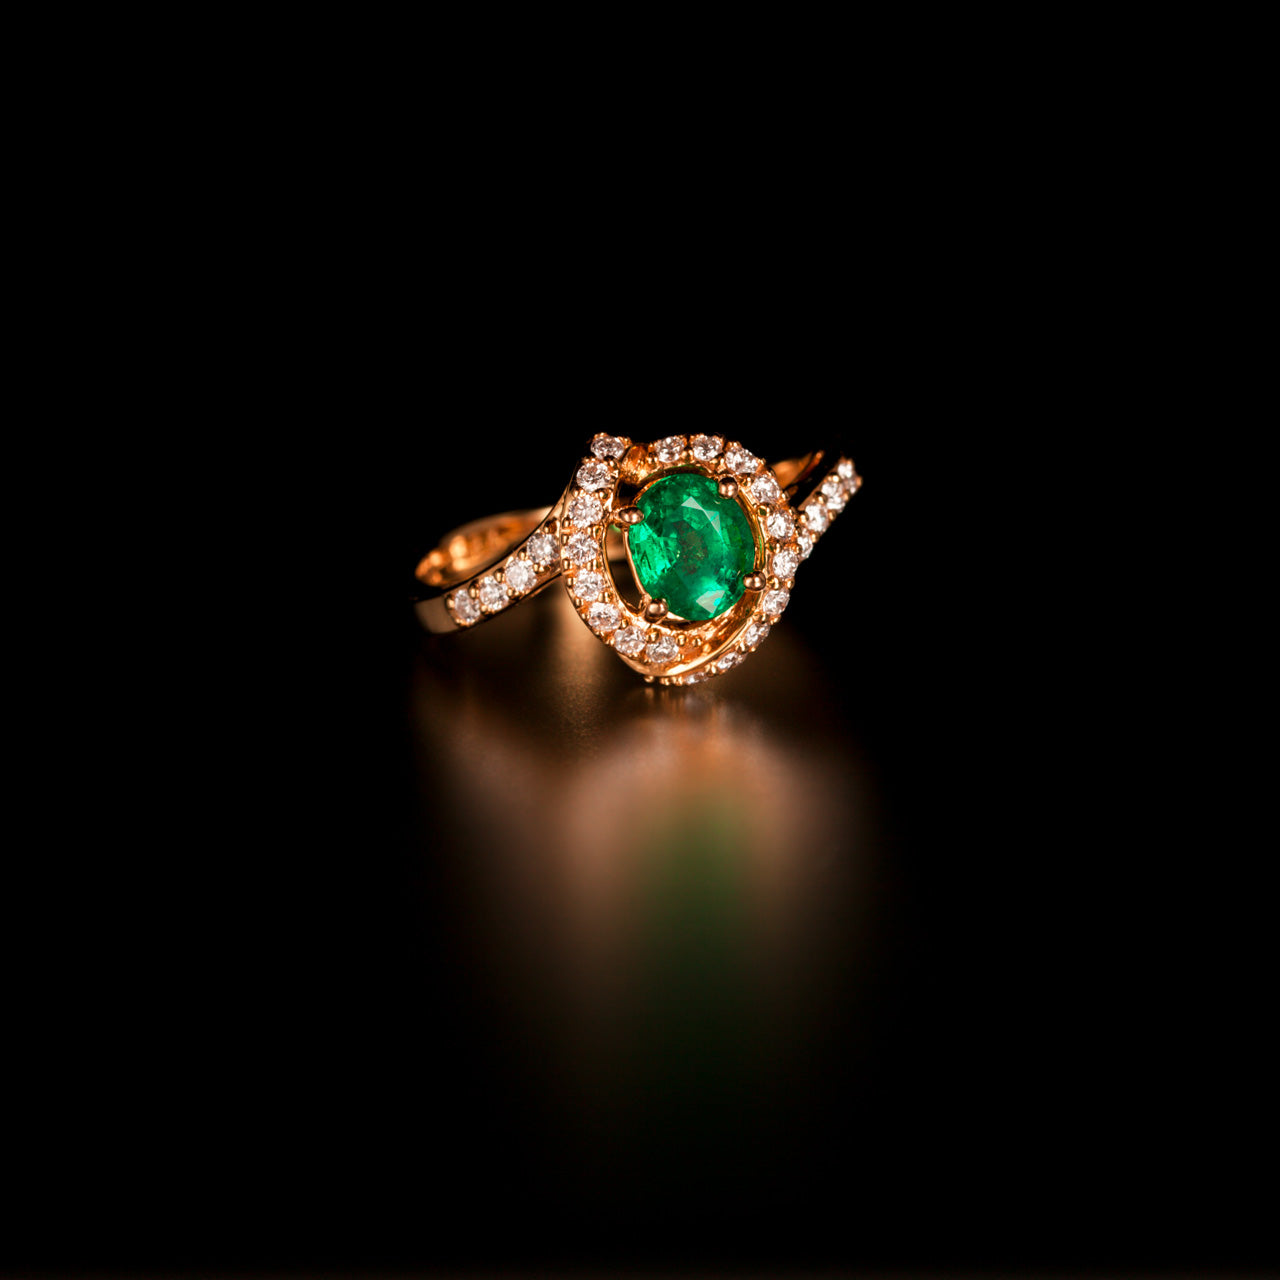 Female hand displaying a 0.56ct natural emerald ring with 18k yellow gold band